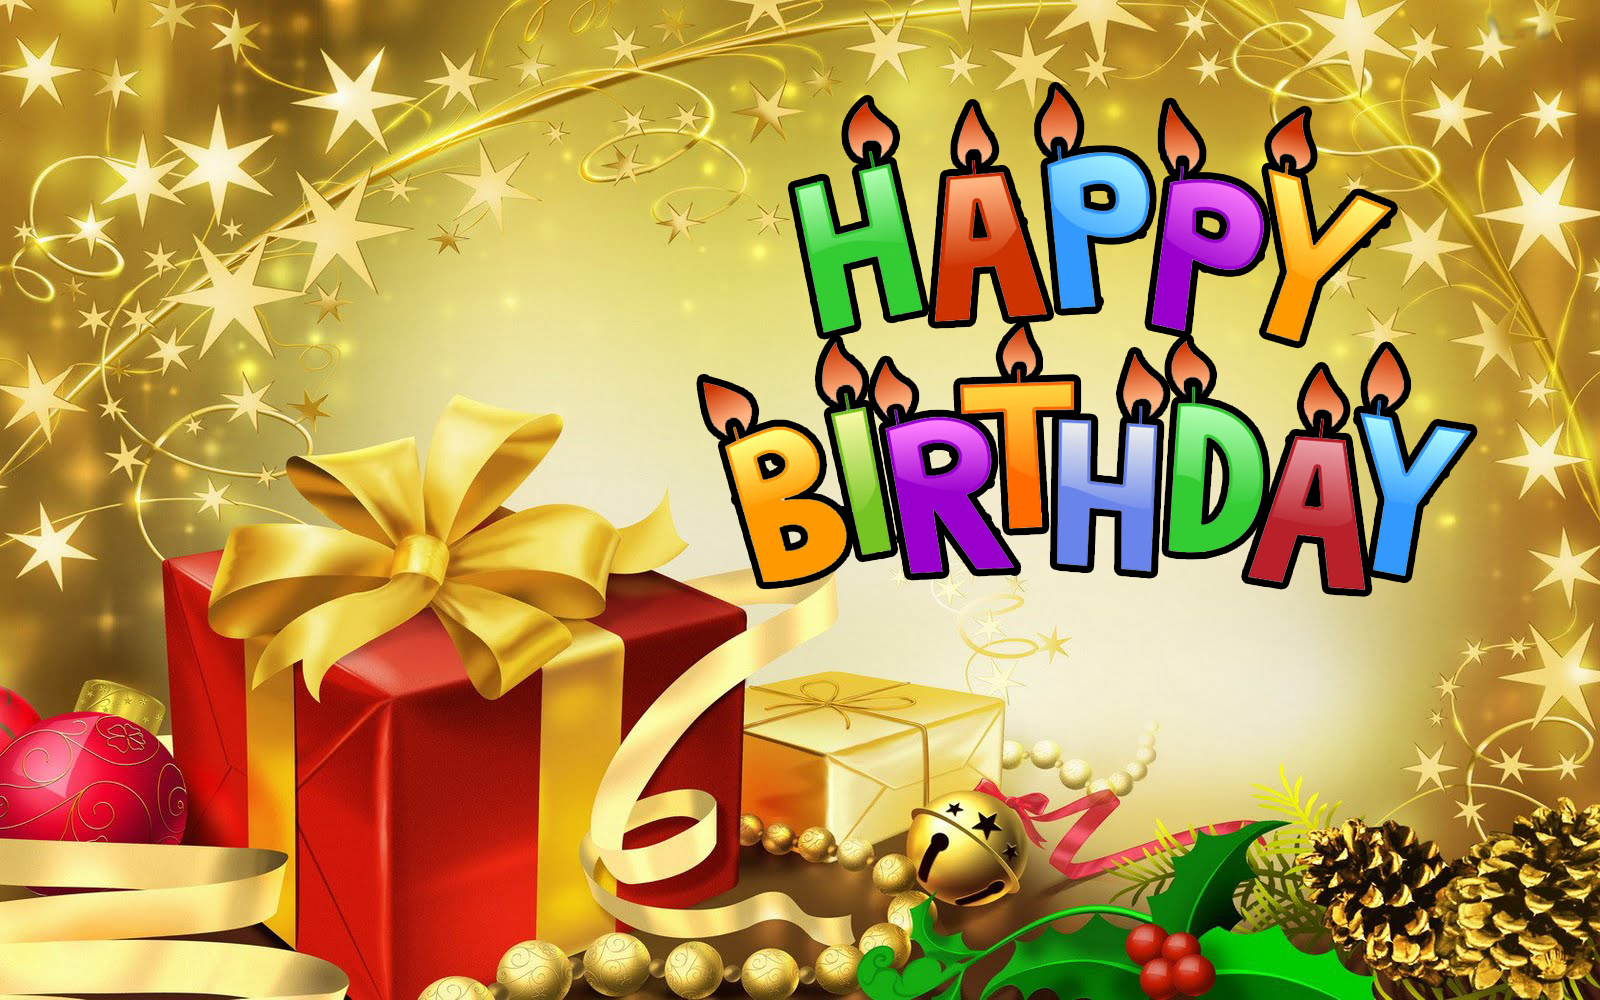 BirtHDay With Gift For Daily Pics Update HD Wallpaper